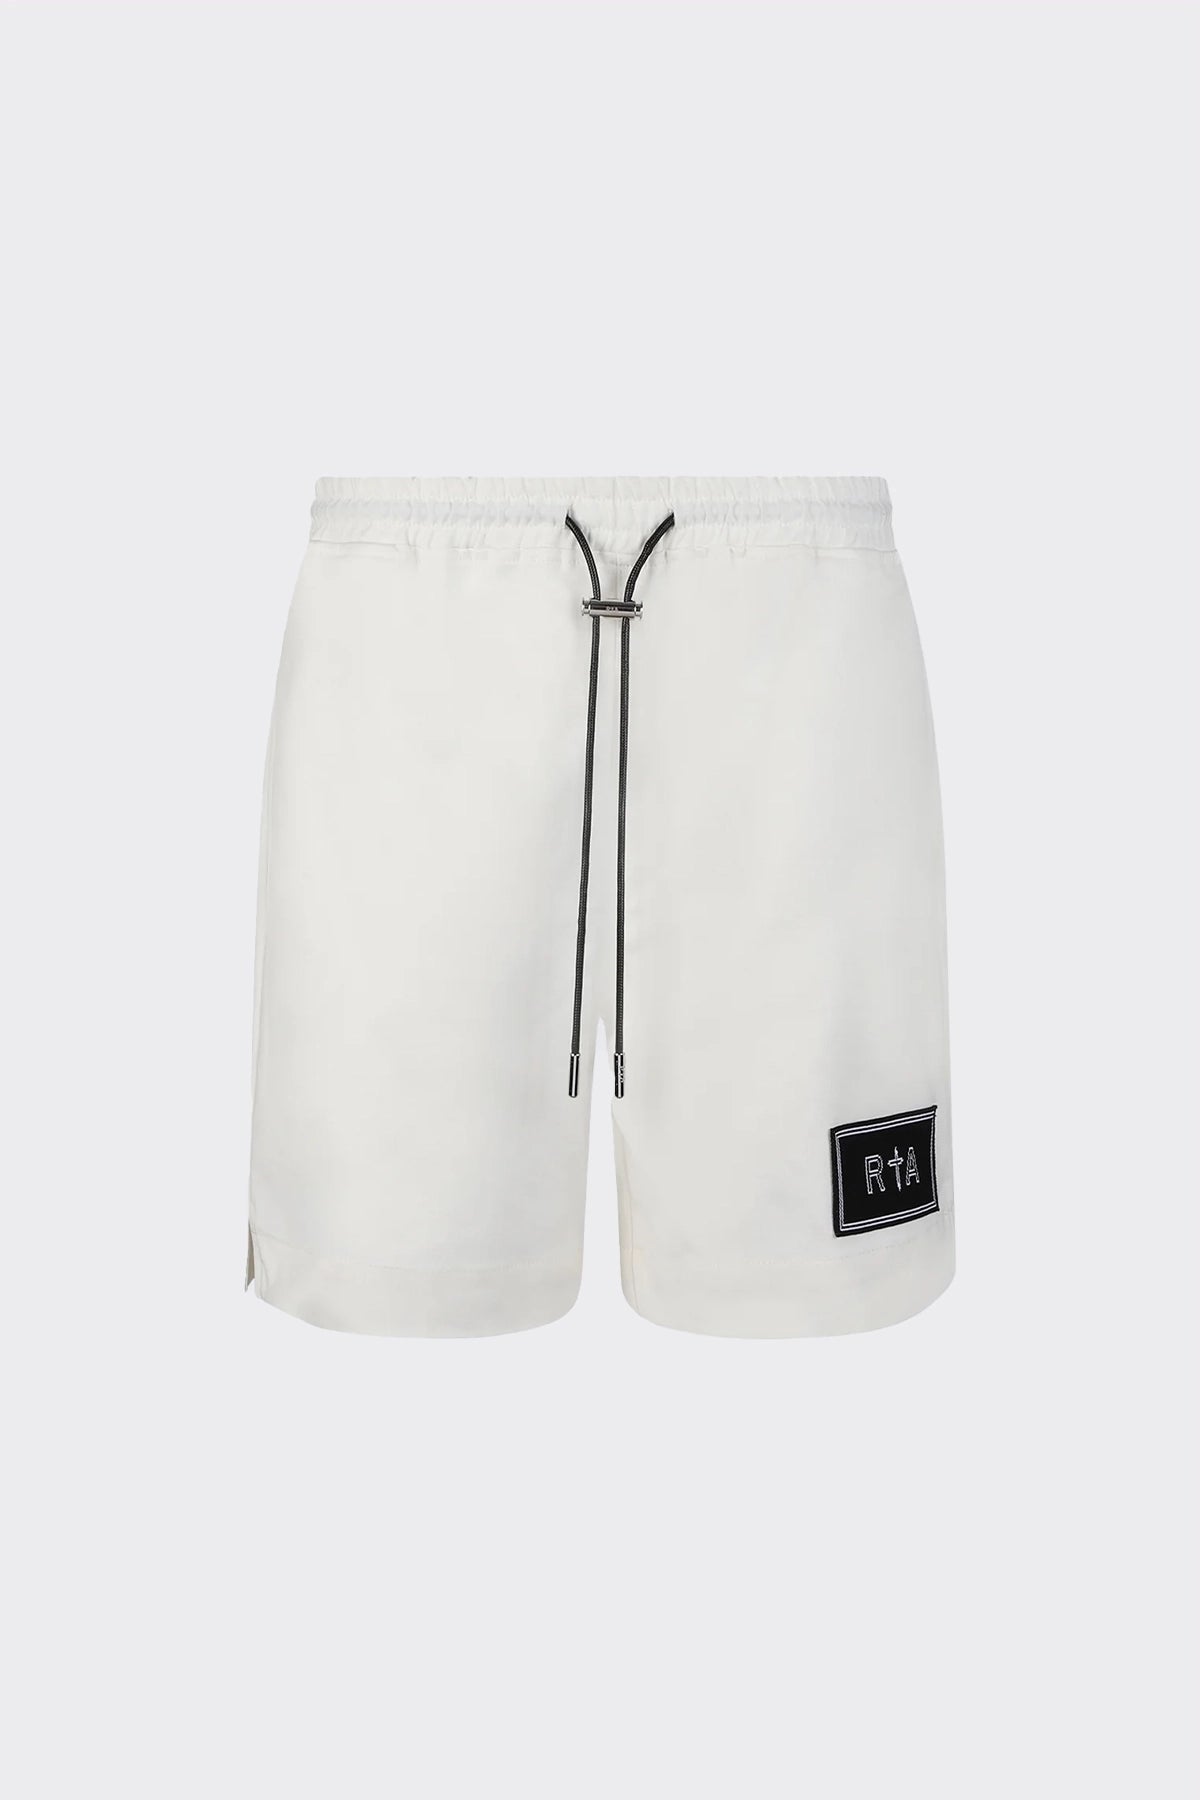 CLYDE SHORT | WHITE PATCH